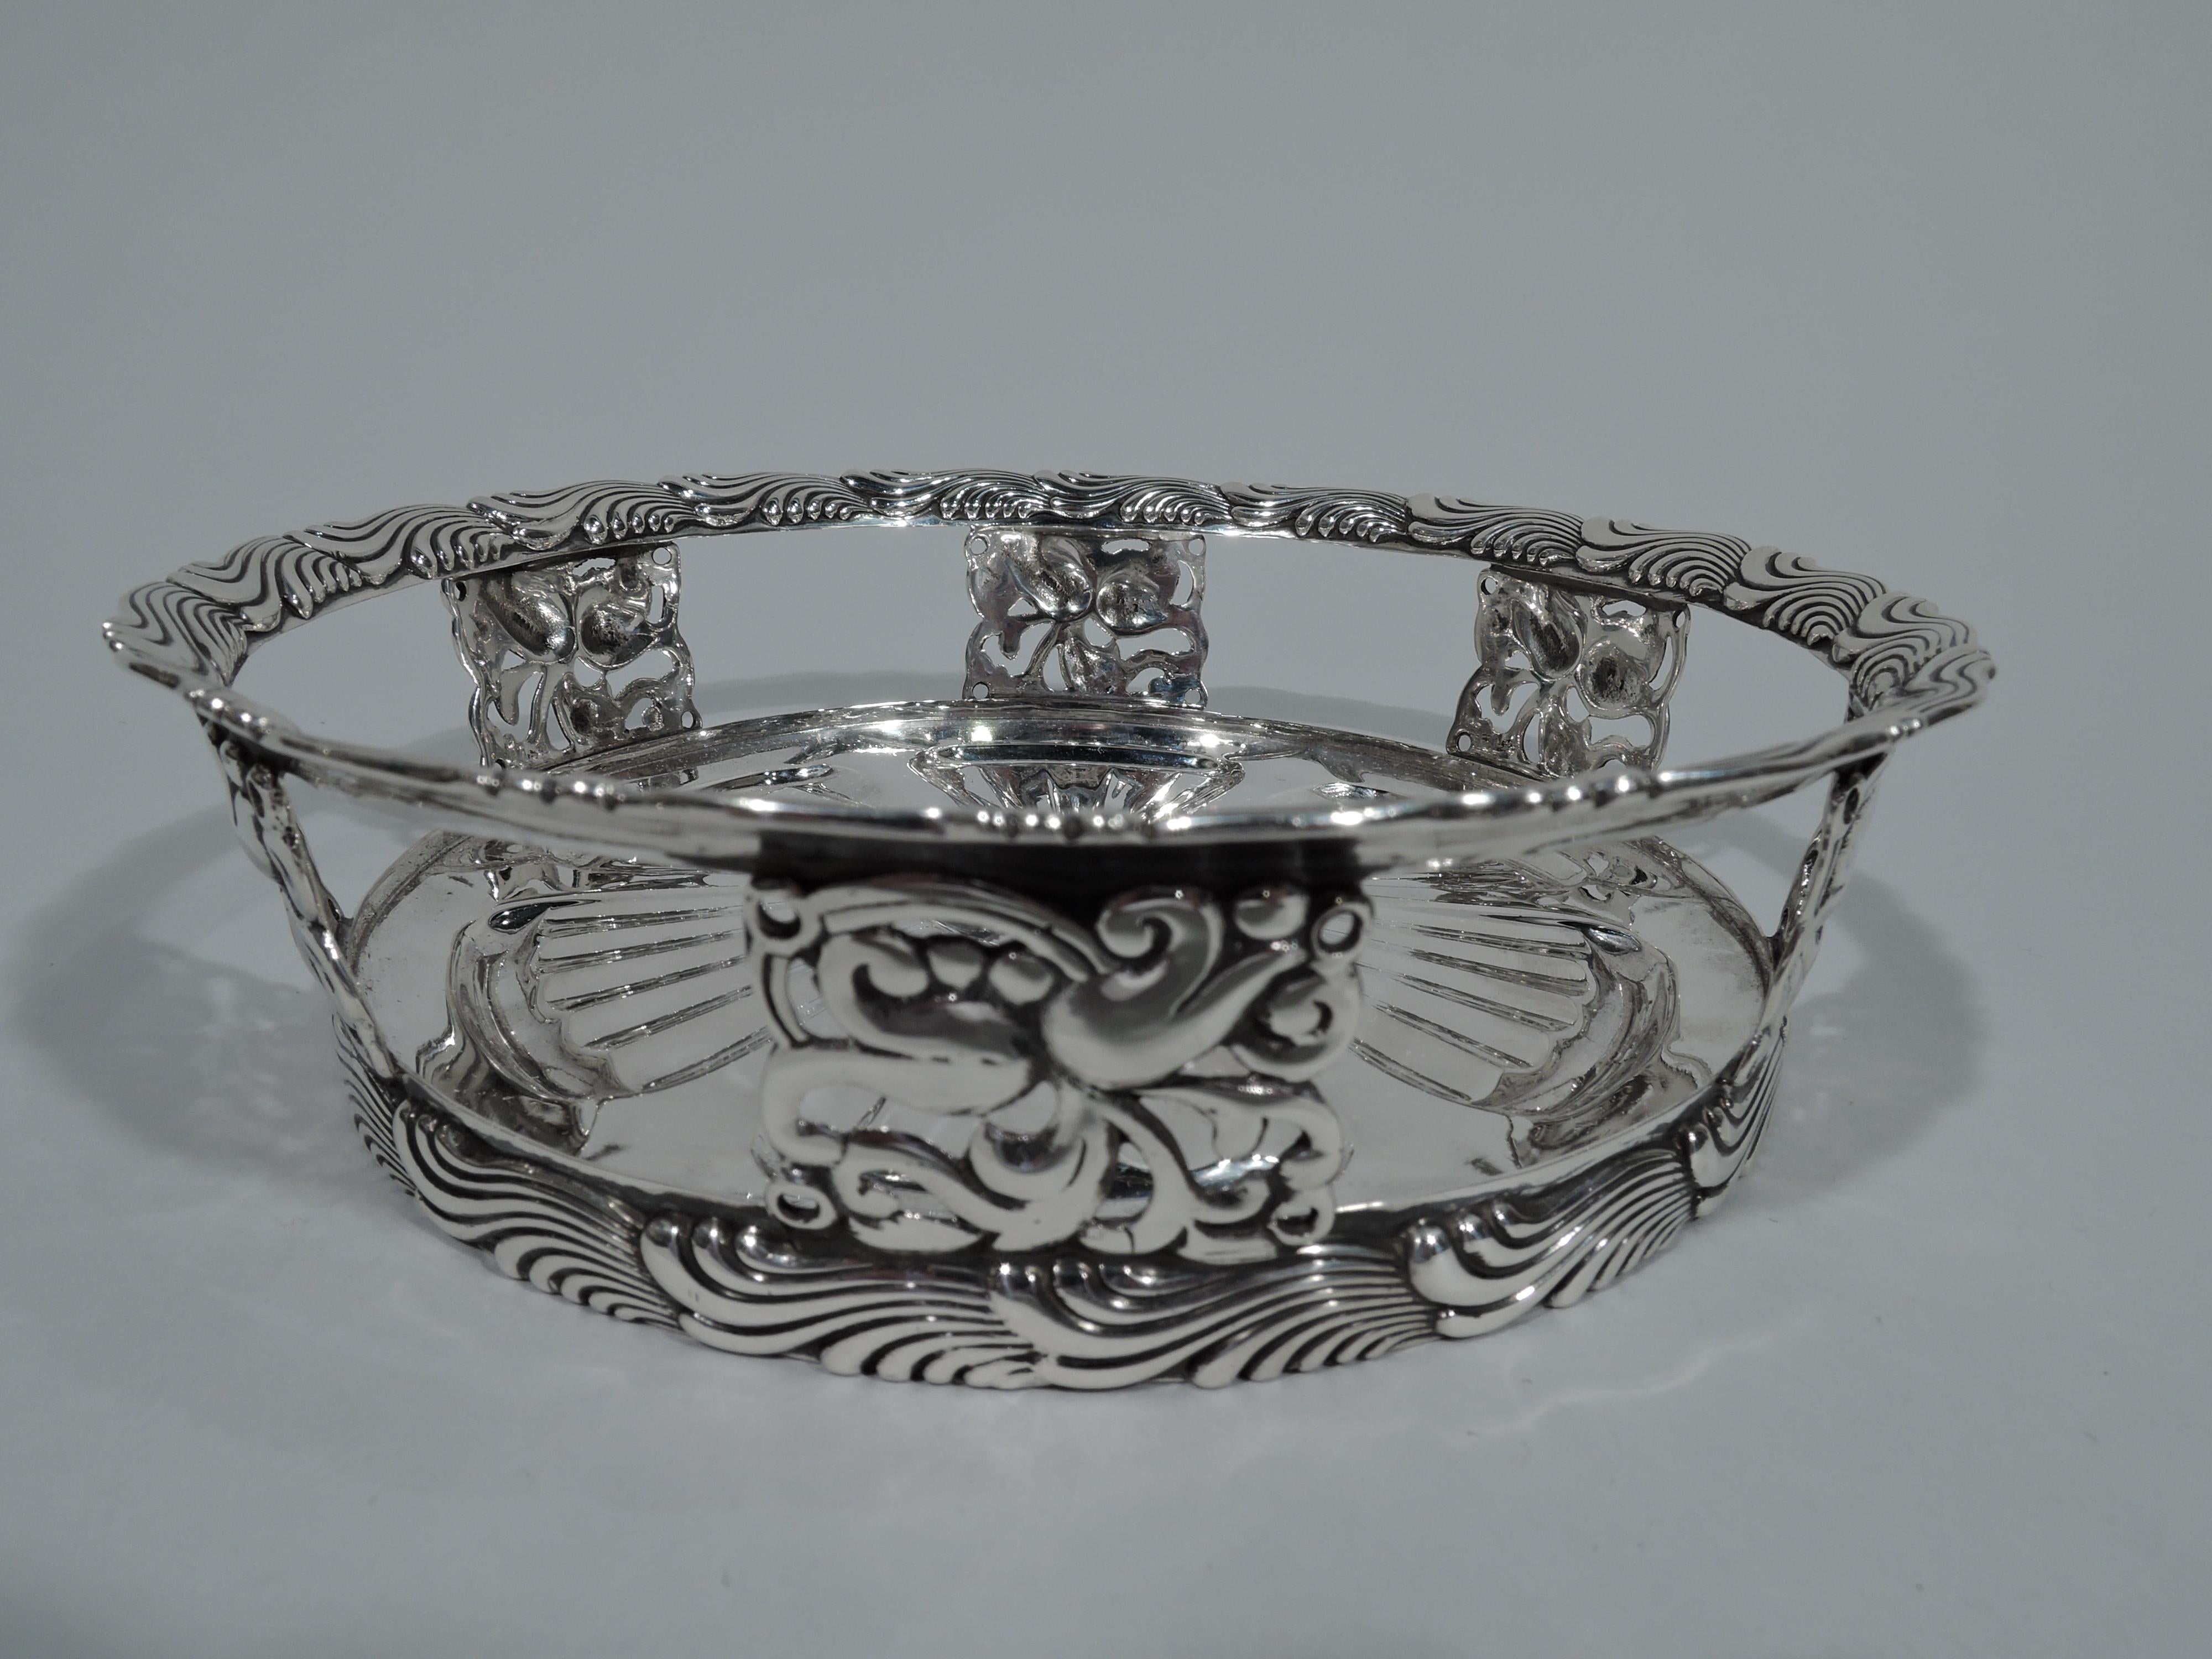 Stylish sterling silver wine bottle coaster. Made by Tiffany & Co. in New York. Solid well with fluted and radiating leaf and dart ornament. Open sides with blocks comprising pierced scrollwork and flowers. Flared rim with chased and fluid wavy